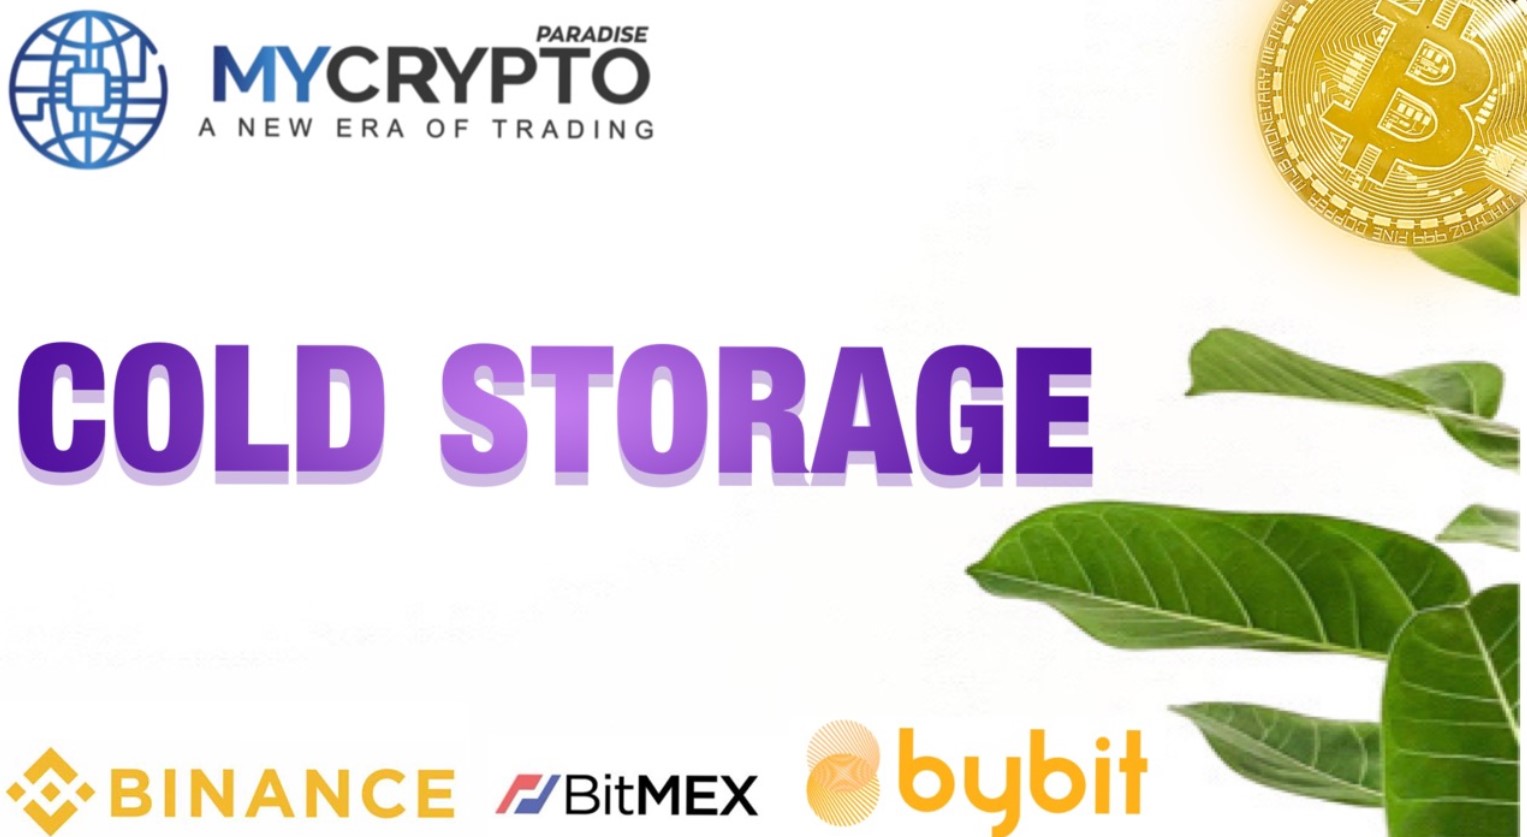 What is bitcoin cold storage?